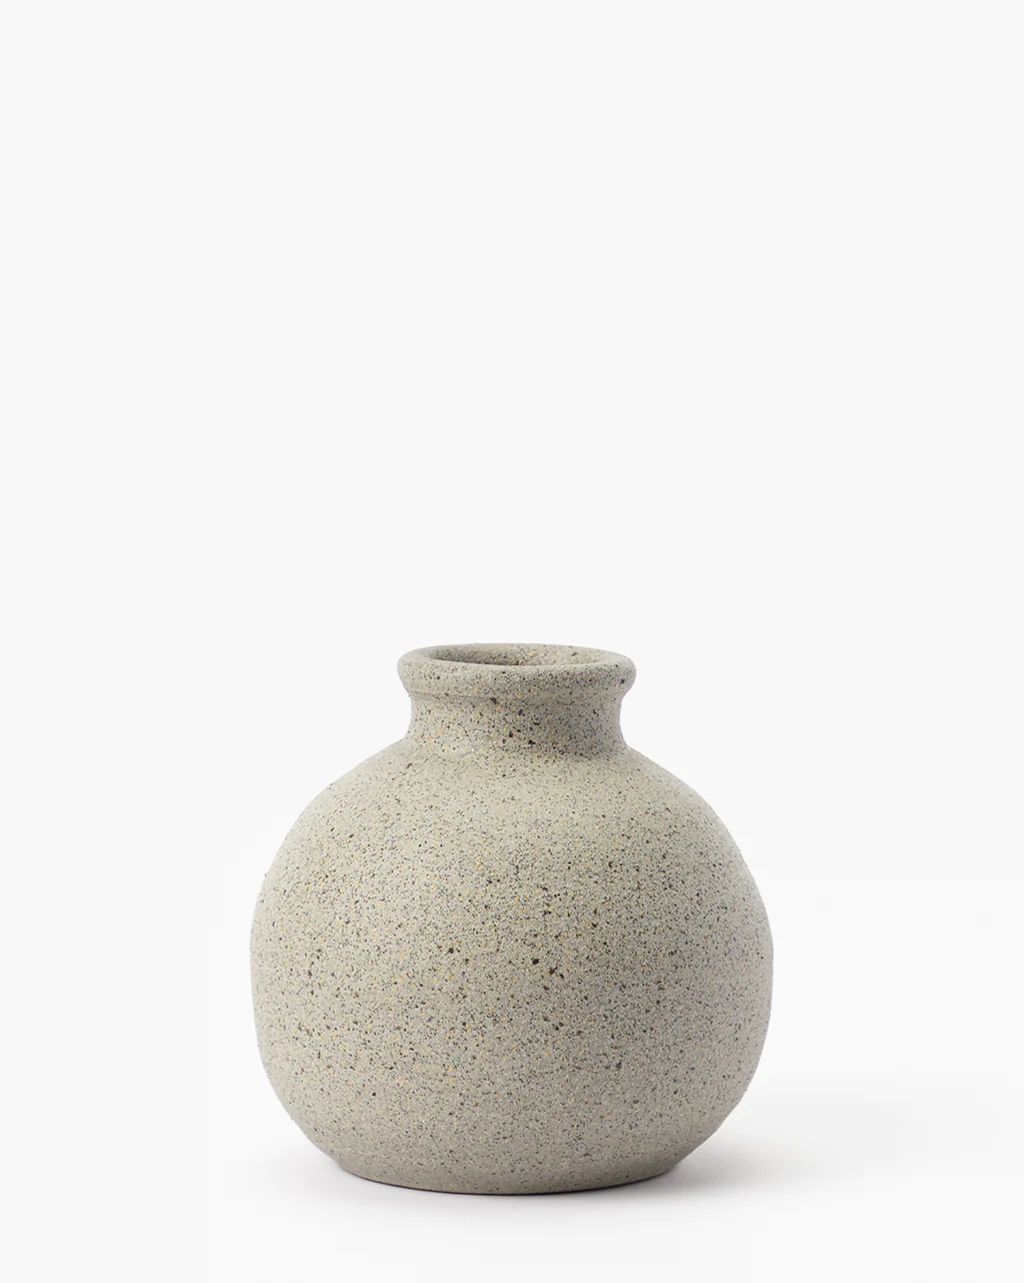 Norris Speckled Vase | McGee & Co.